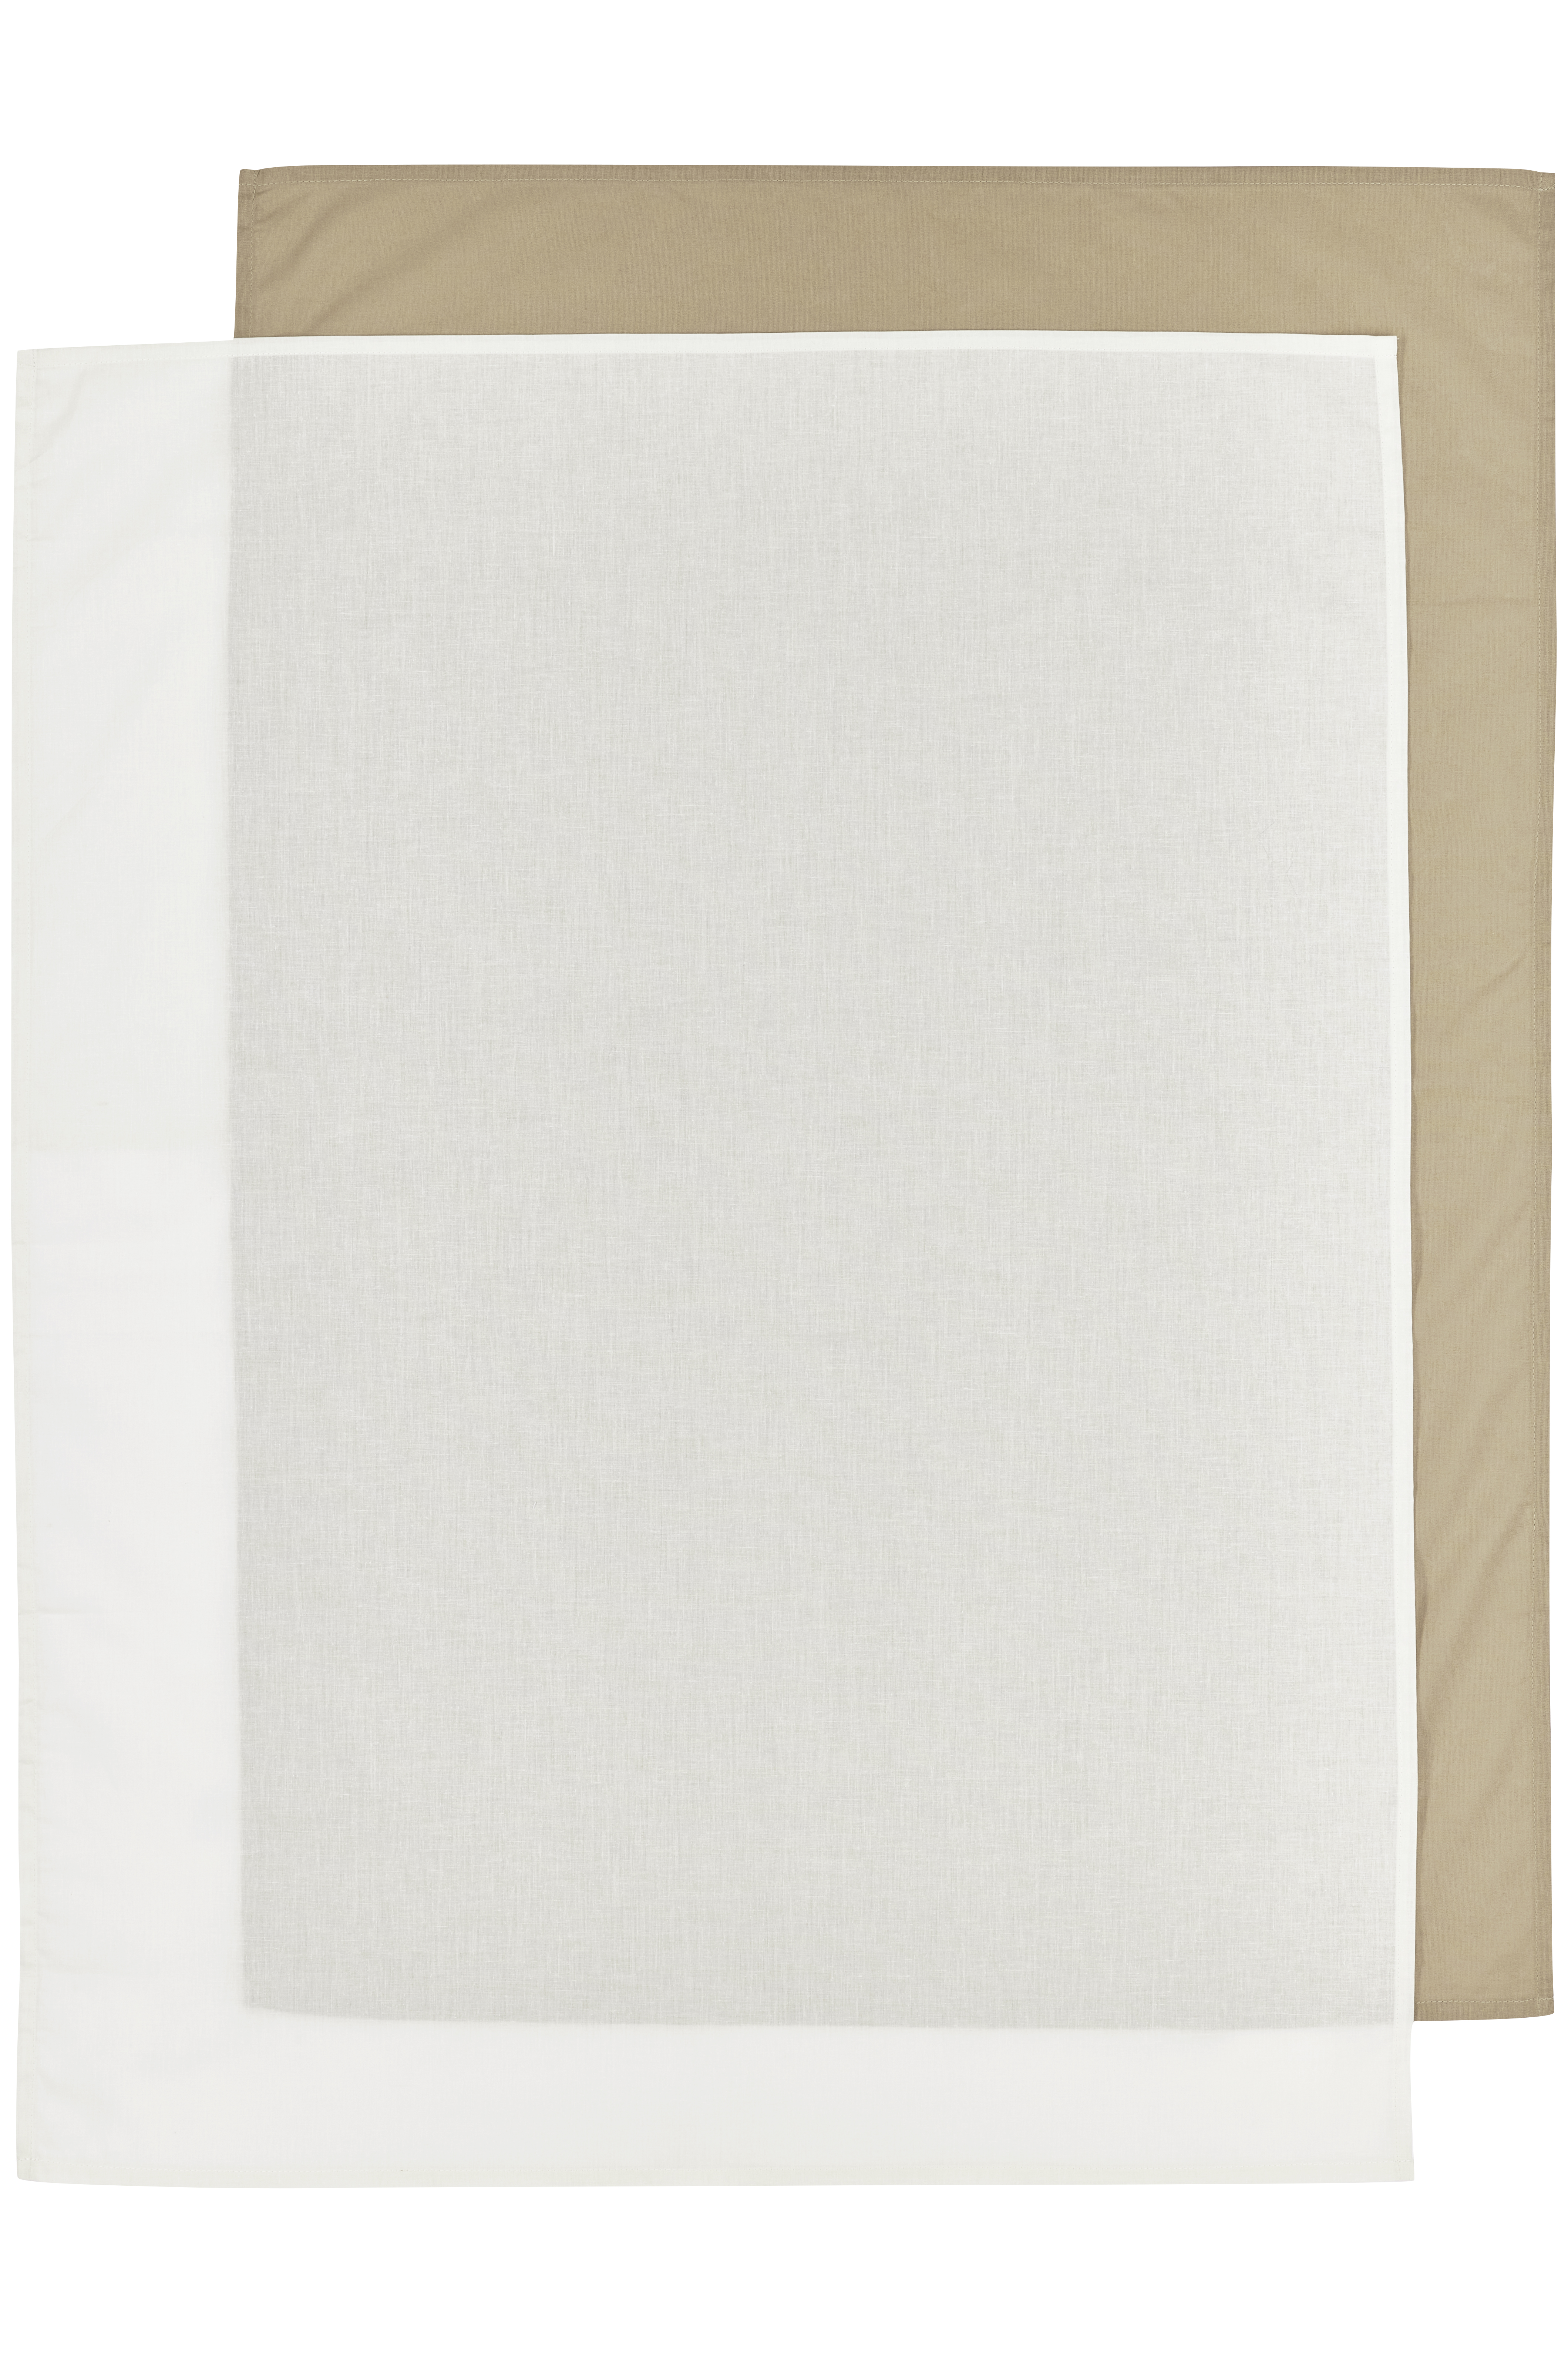 Wieglaken 2-pack Uni - taupe/offwhite - 75x100cm